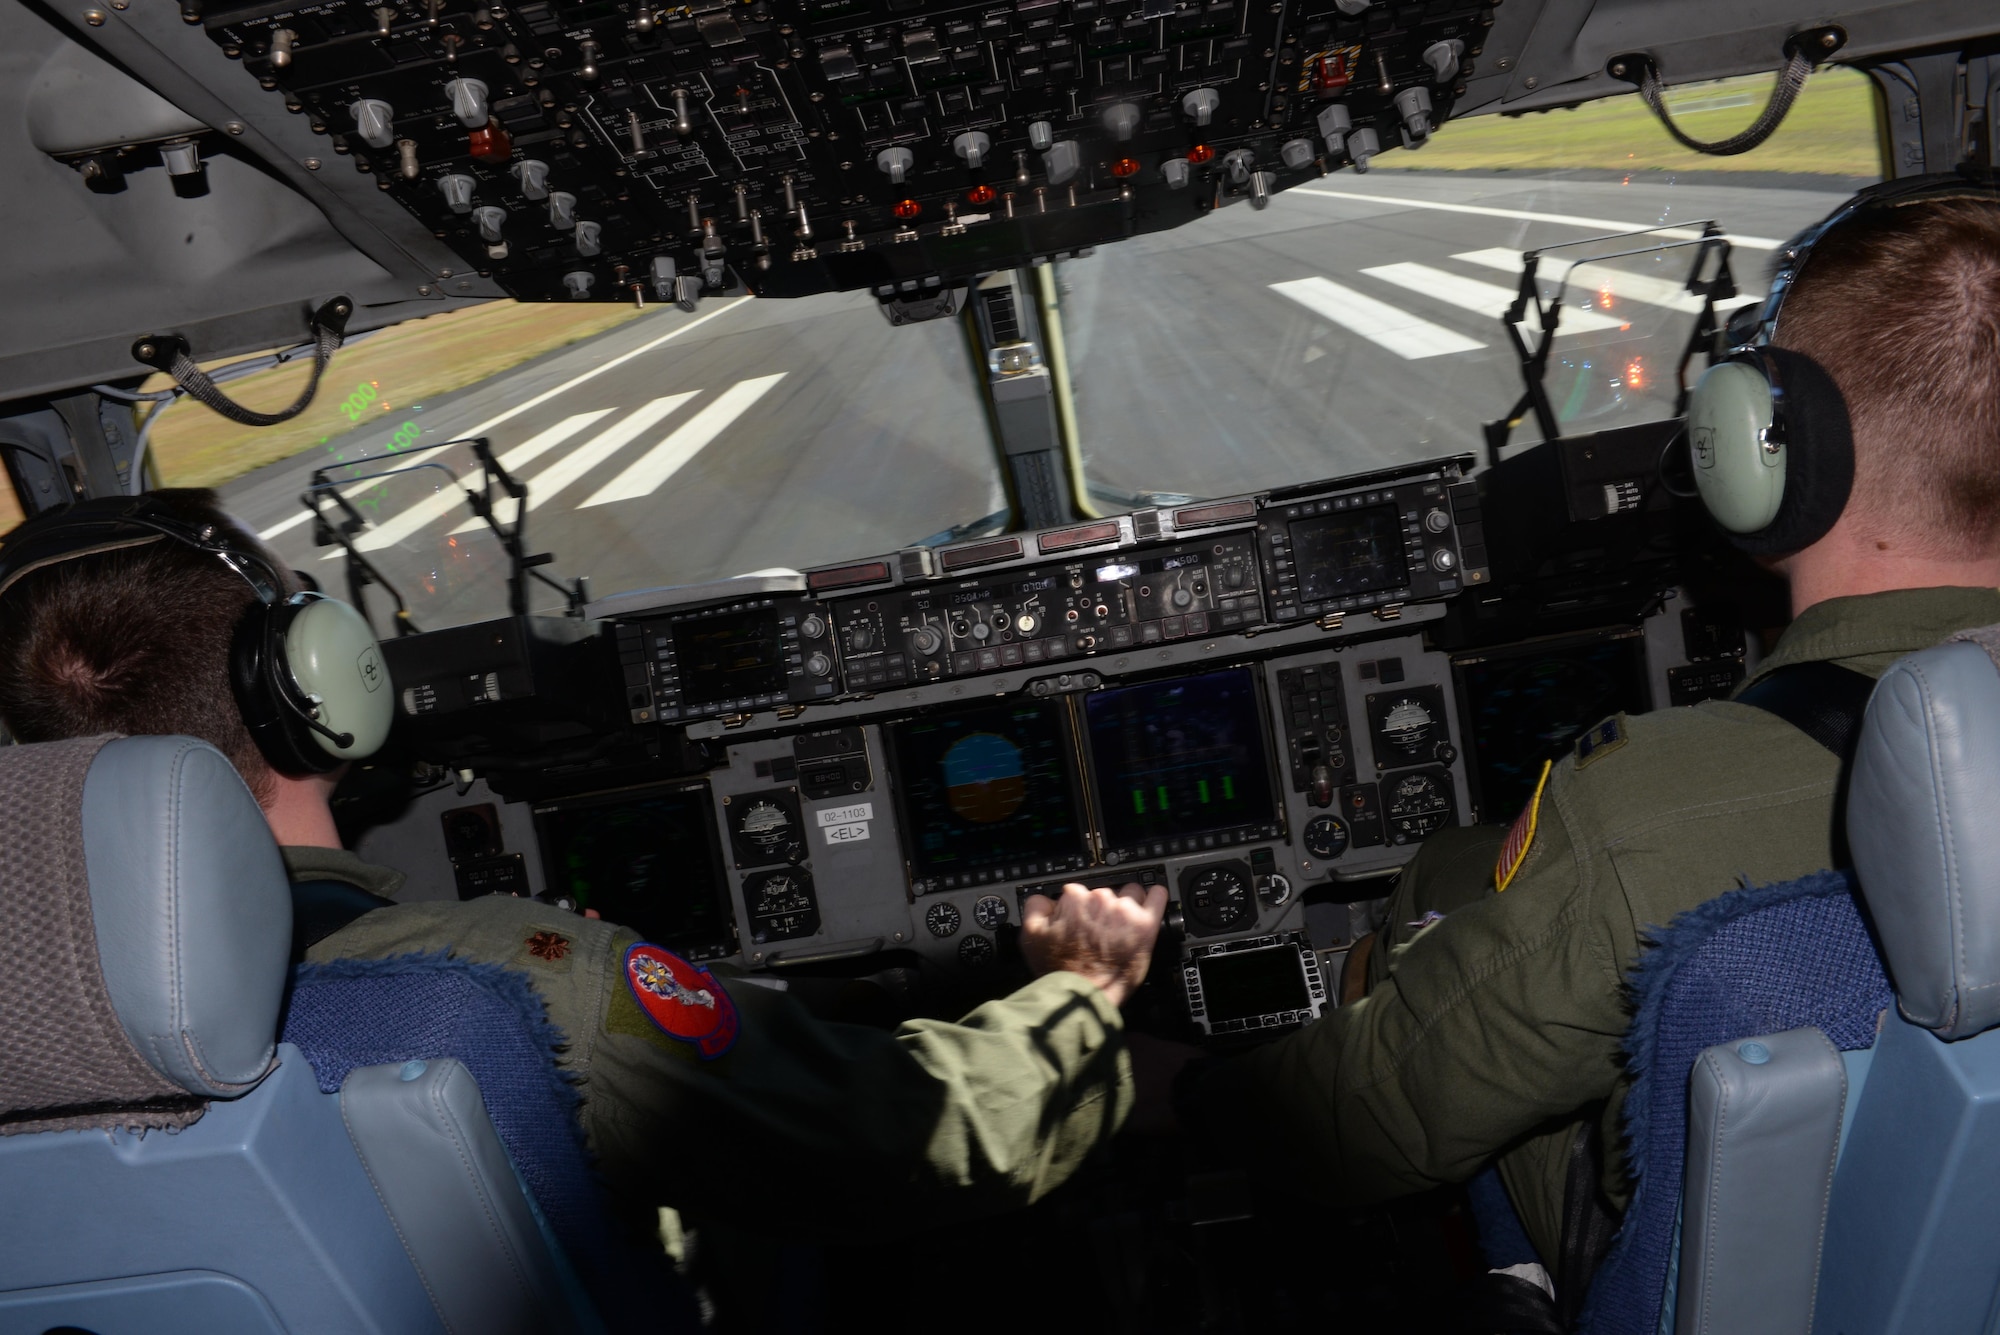 U.S. Air Force Maj. David Tomlinson, 58th Airlift Squadron evaluation pilot and U.S. Air Force Capt. Patrick O’neil, 58th AS instructor pilot, approach a landing strip in a U.S. Air Force C-17 Globemaster III cargo aircraft at Ilopango International Airport, San Salvador in El Savador, Jan. 30, during the 2016 Ilopango Airshow. The C-17 was sent from Altus Air Force Base, Okla., to foster relationships between the U.S. and El Salvador. The aircraft was setup as a static display for the attendees to view and learn about some of its capabilities. (U.S. Air Force photo by Senior Airman Franklin R. Ramos/Released)